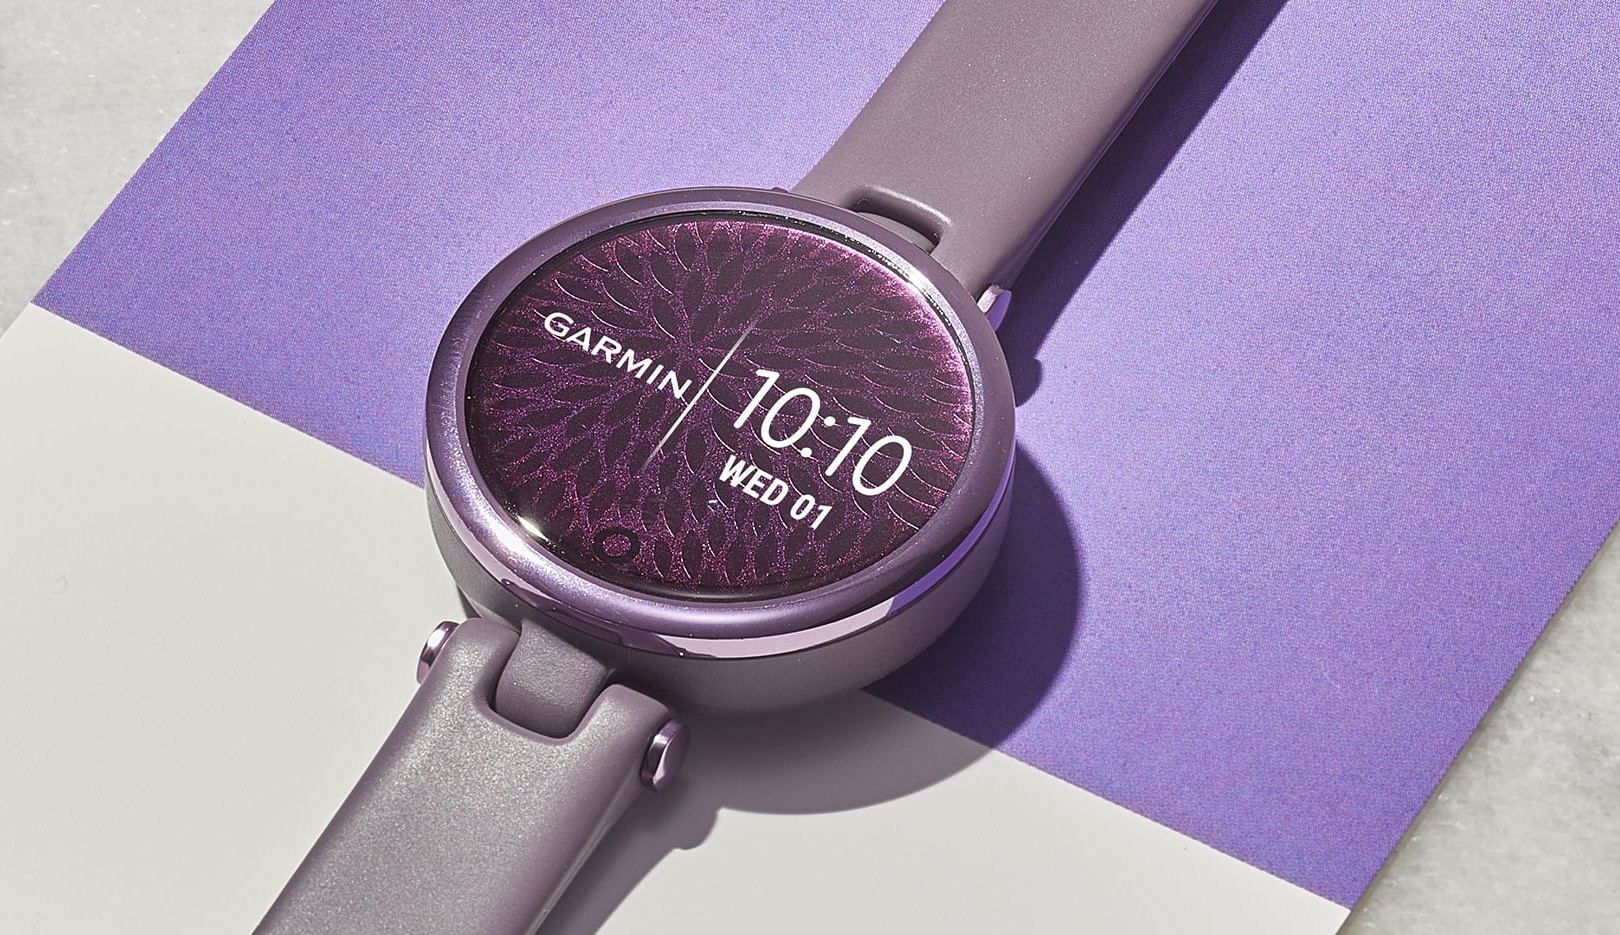 Details about new Garmin smartwatches surface with UK pricing also shown